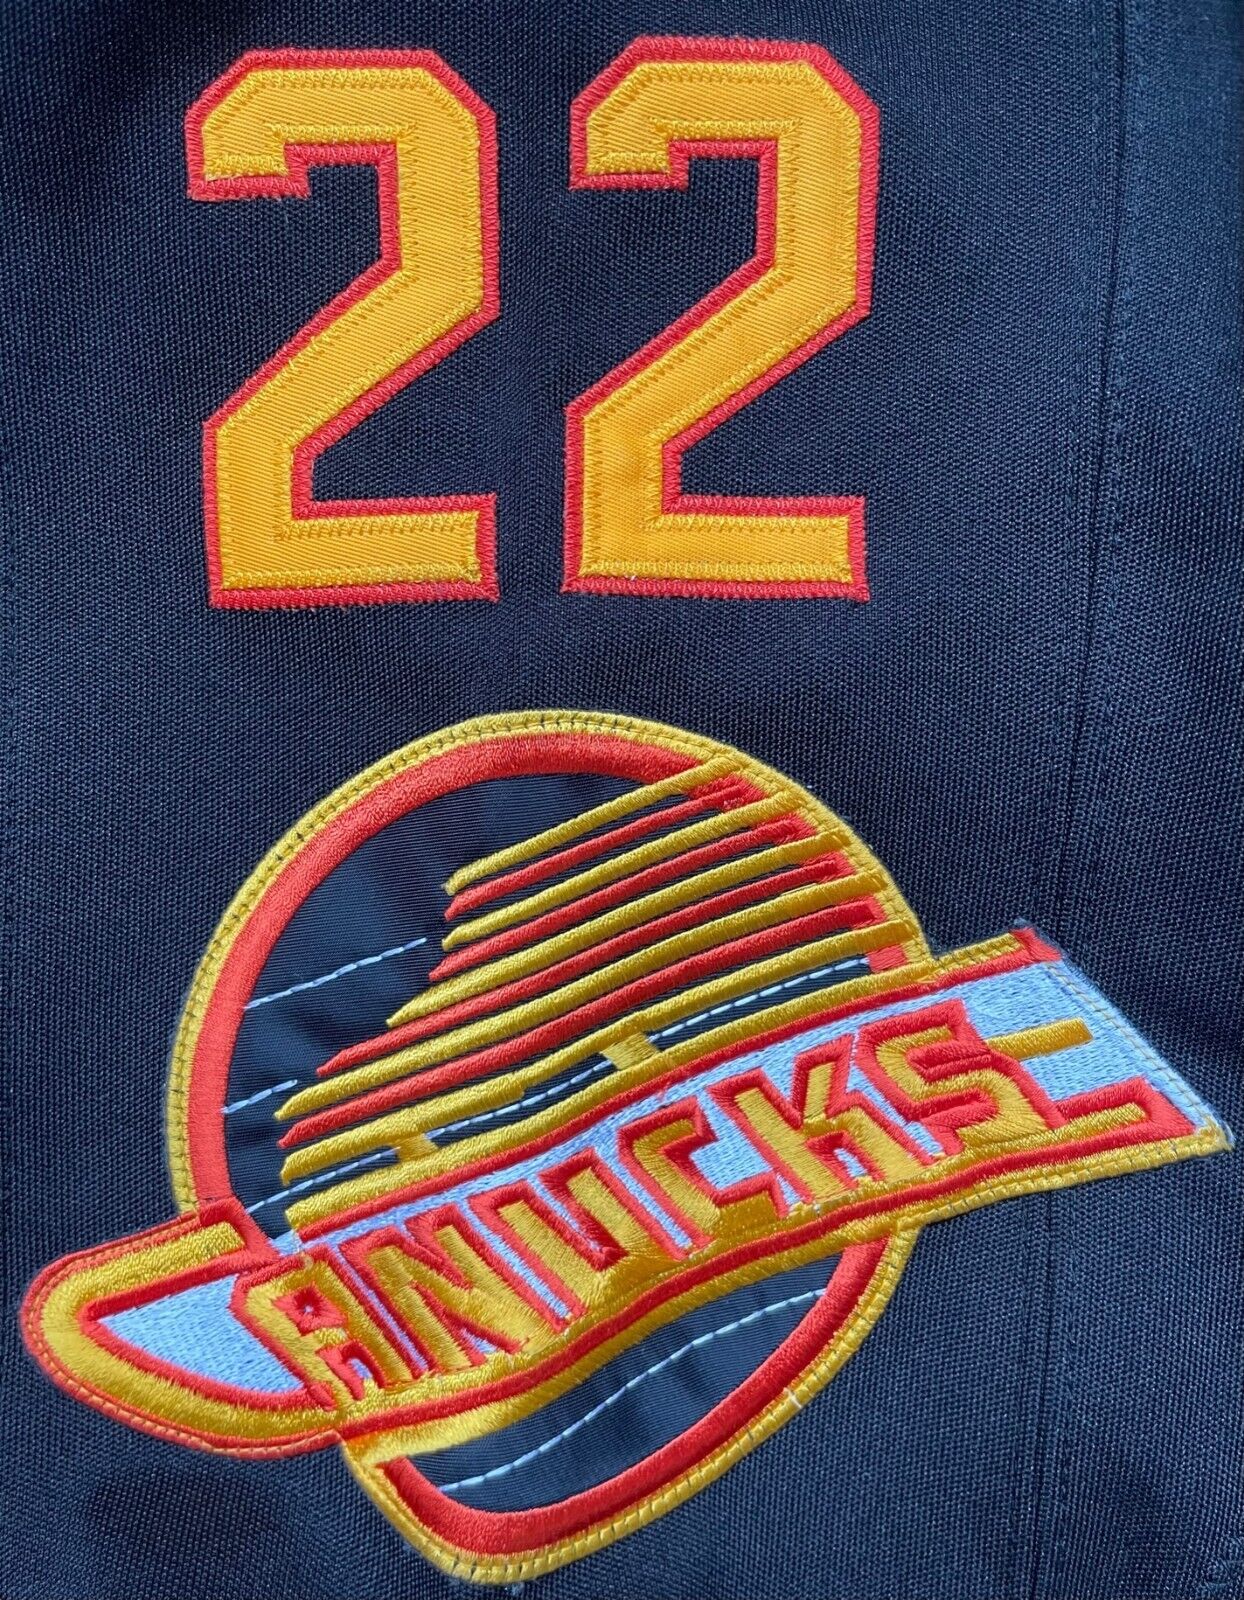 Tiger Williams 1982-83 Mitchell & Ness Vancouver Canucks Jersey